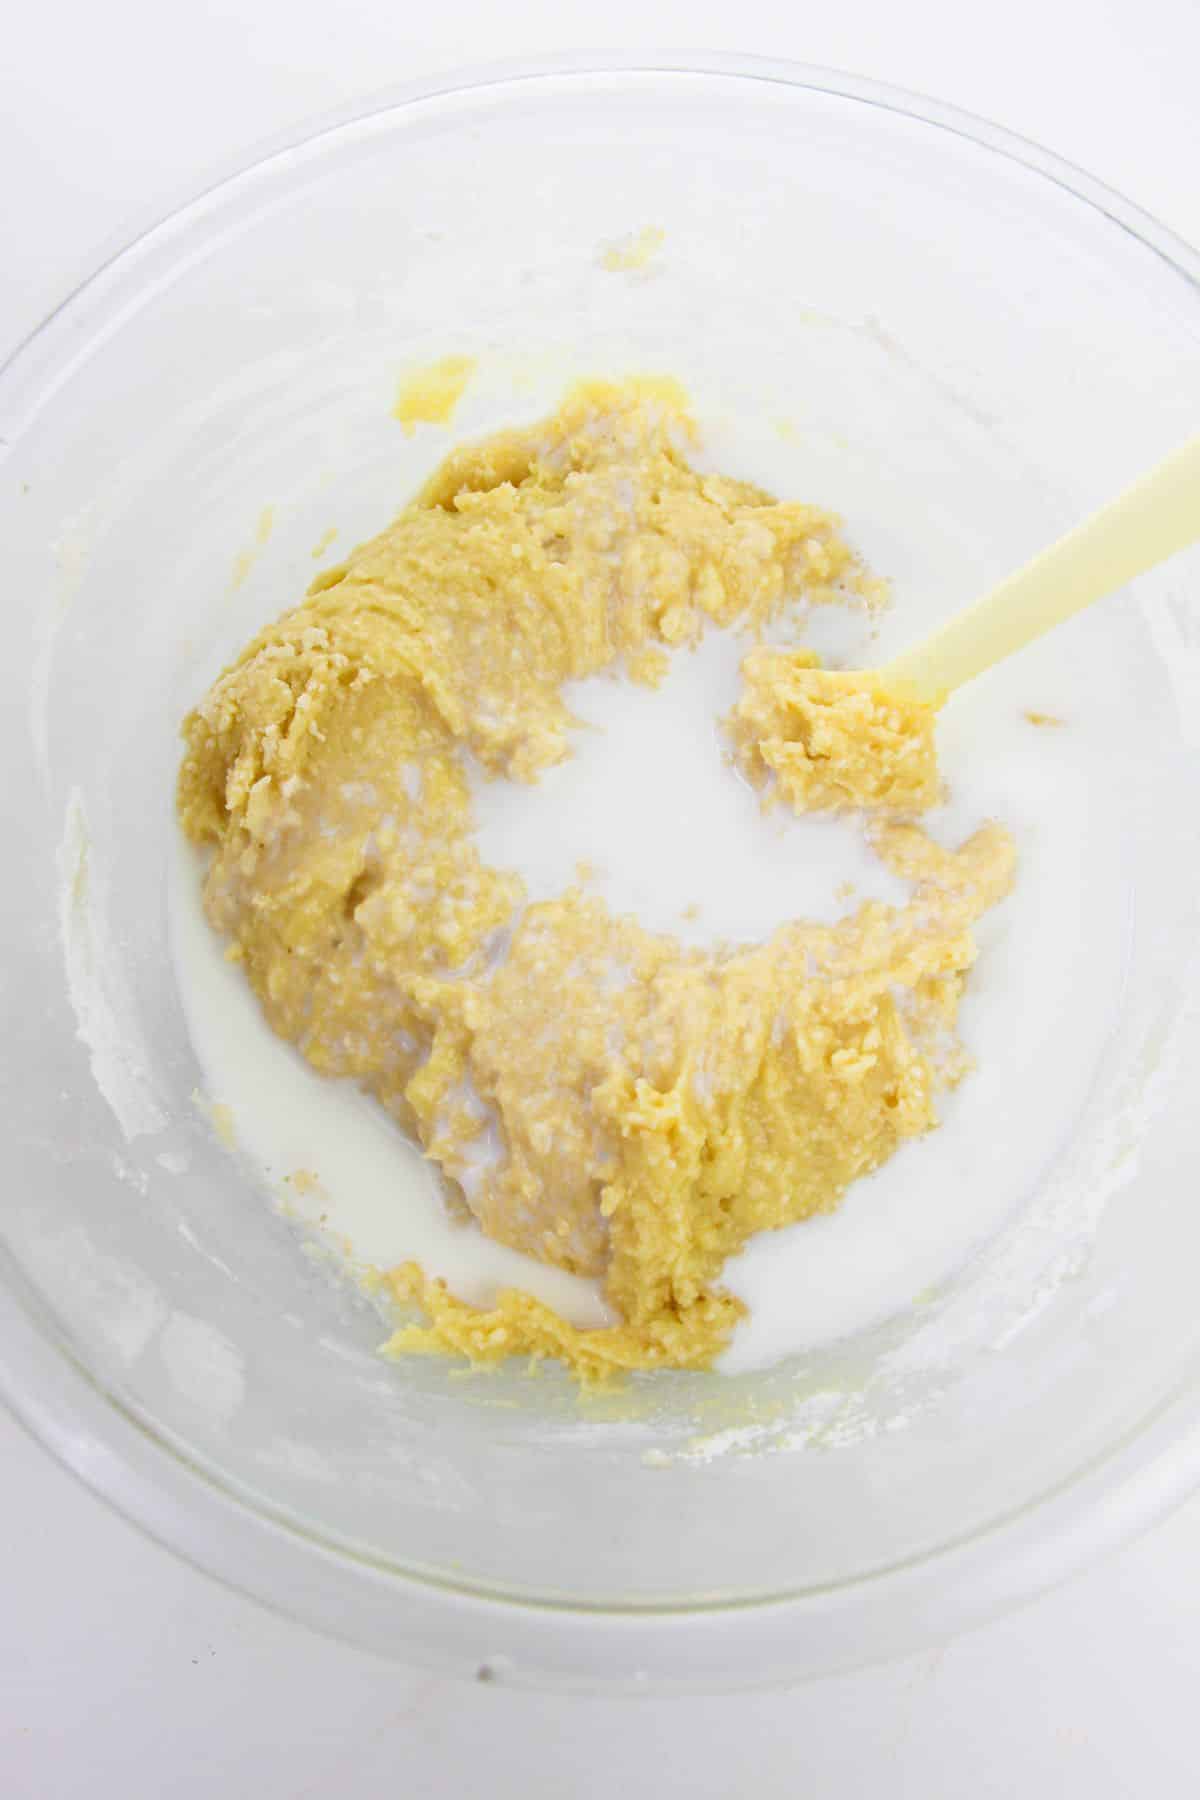 Flour mixture with milk in a glass bowl